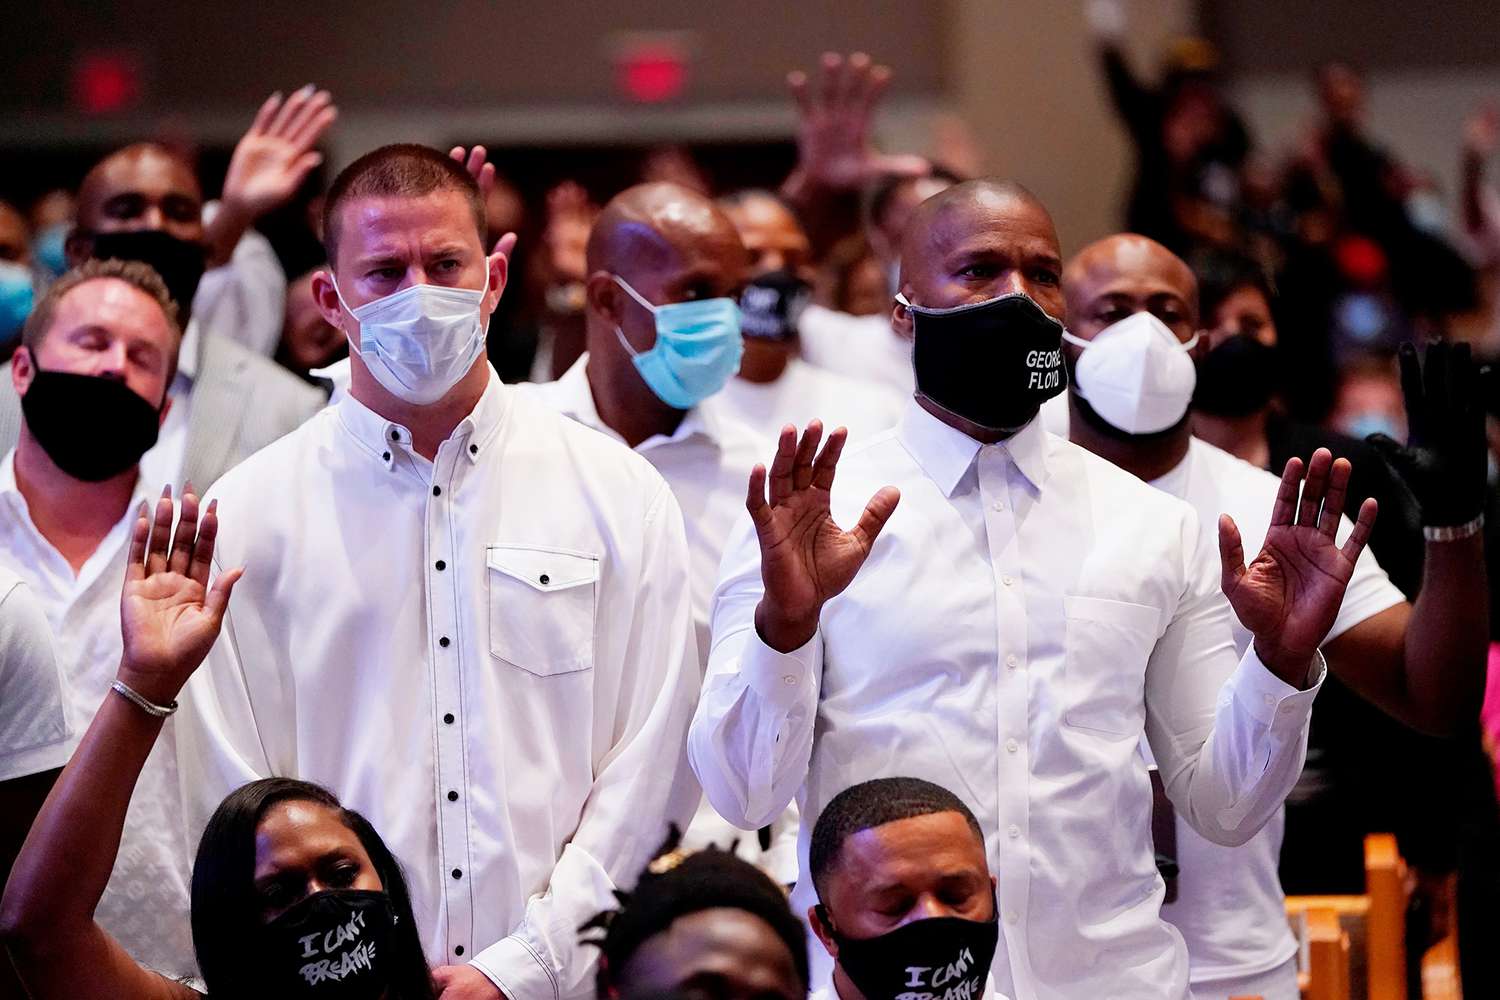 Channing Tatum (L) and Jamie Foxx (R) take part in the funeral of George Floyd on June 9, 2020, at The Fountain of Praise church in Houston, Texas